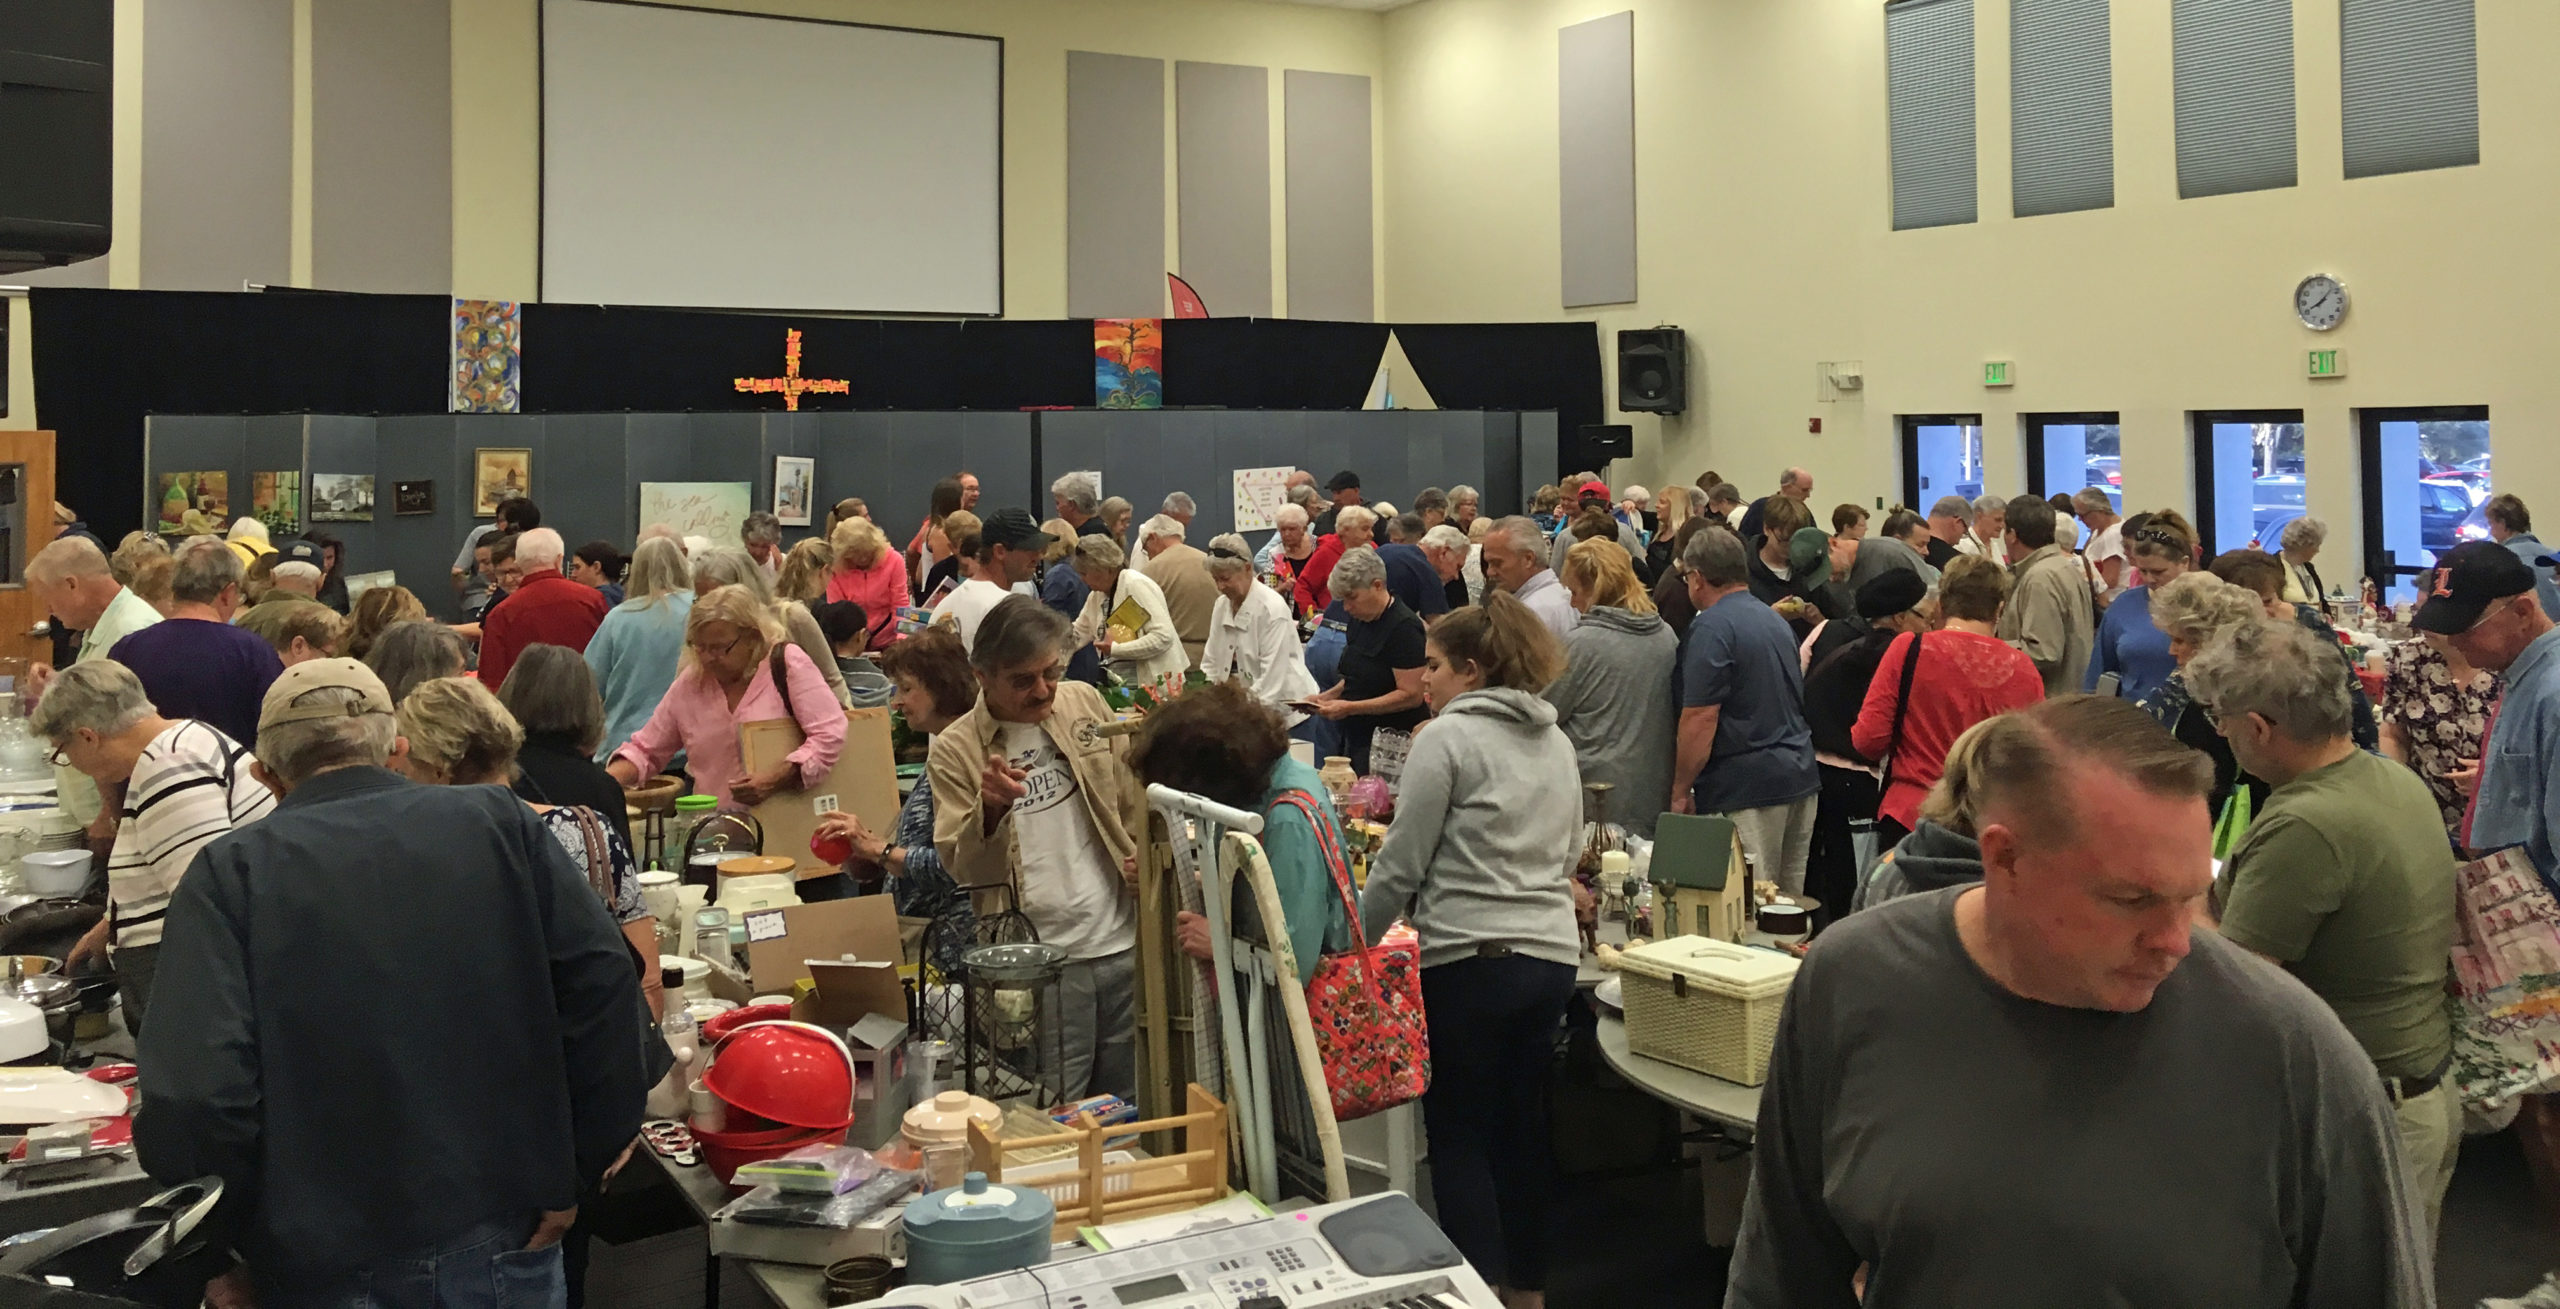 'AWESOME Rummage Sale' at Eastminster Presbyterian Church